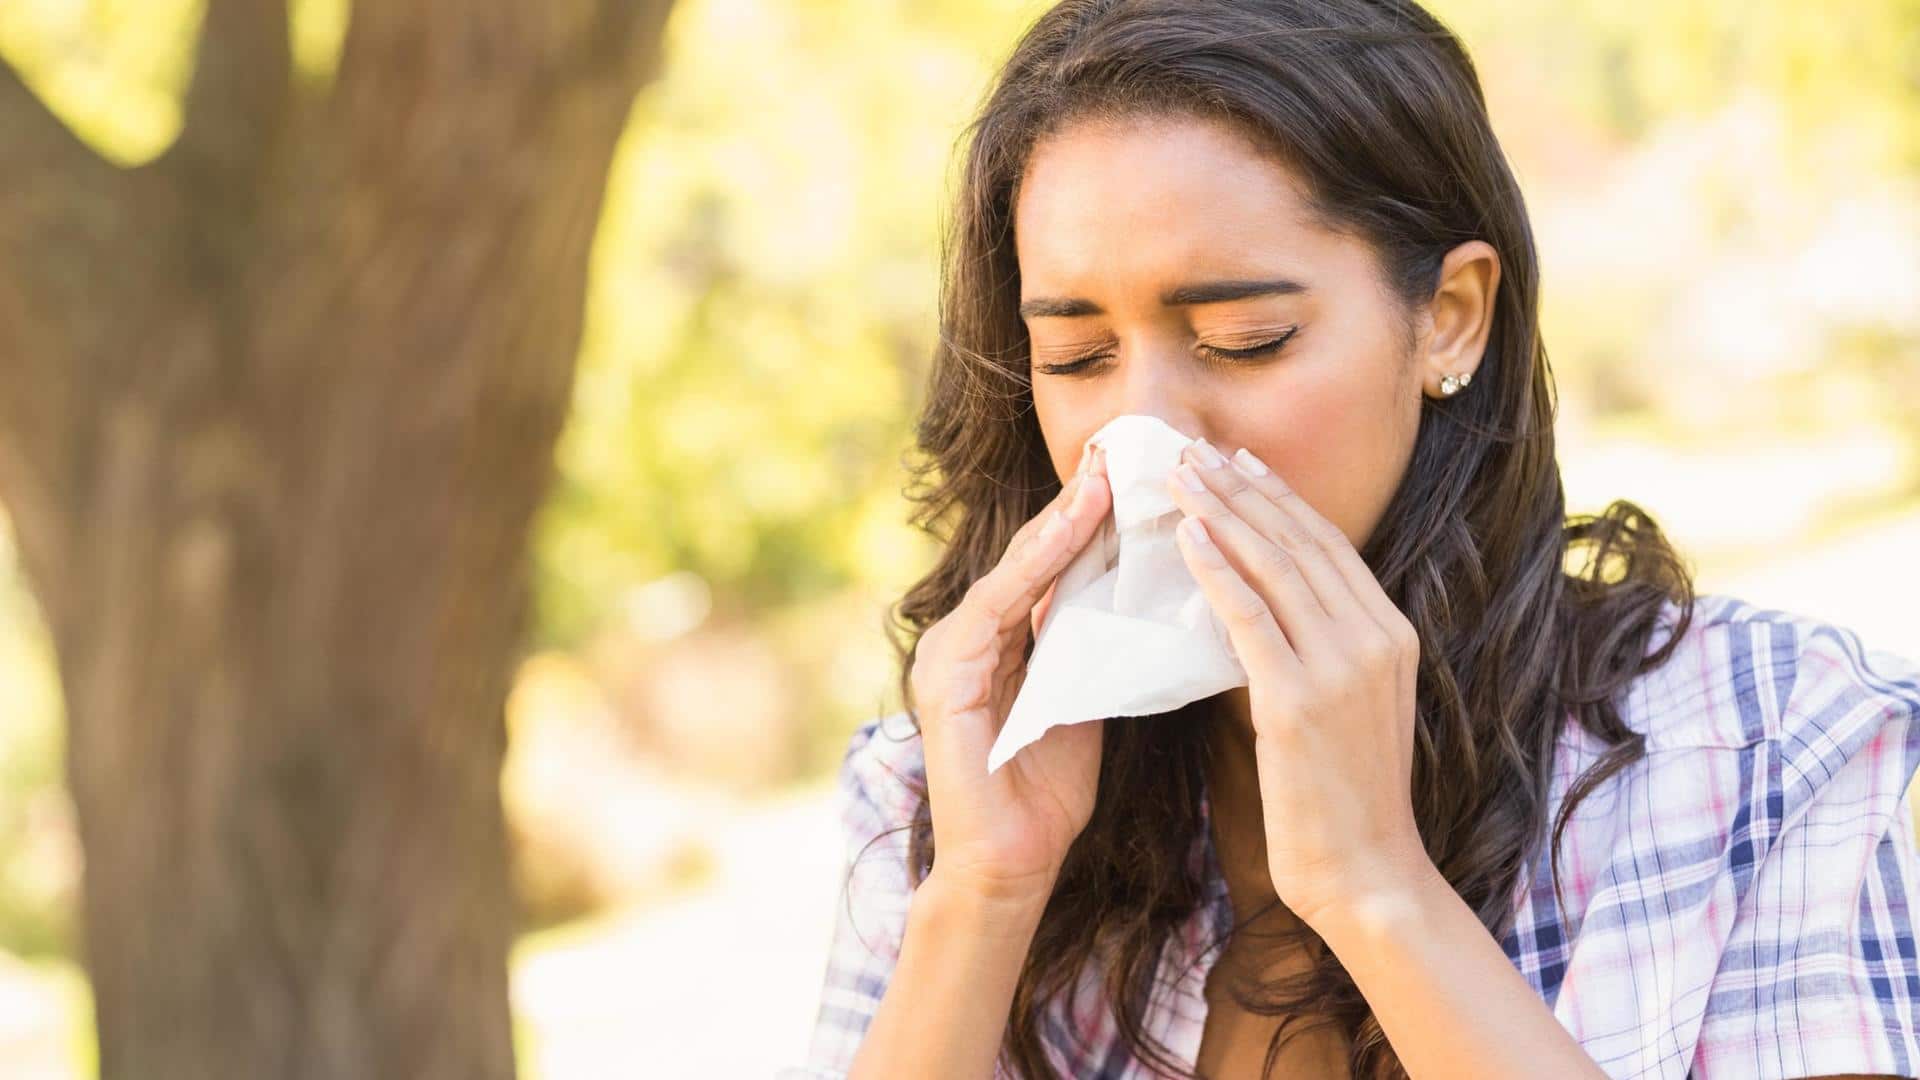 Allergies are getting worse and climate change is the culprit